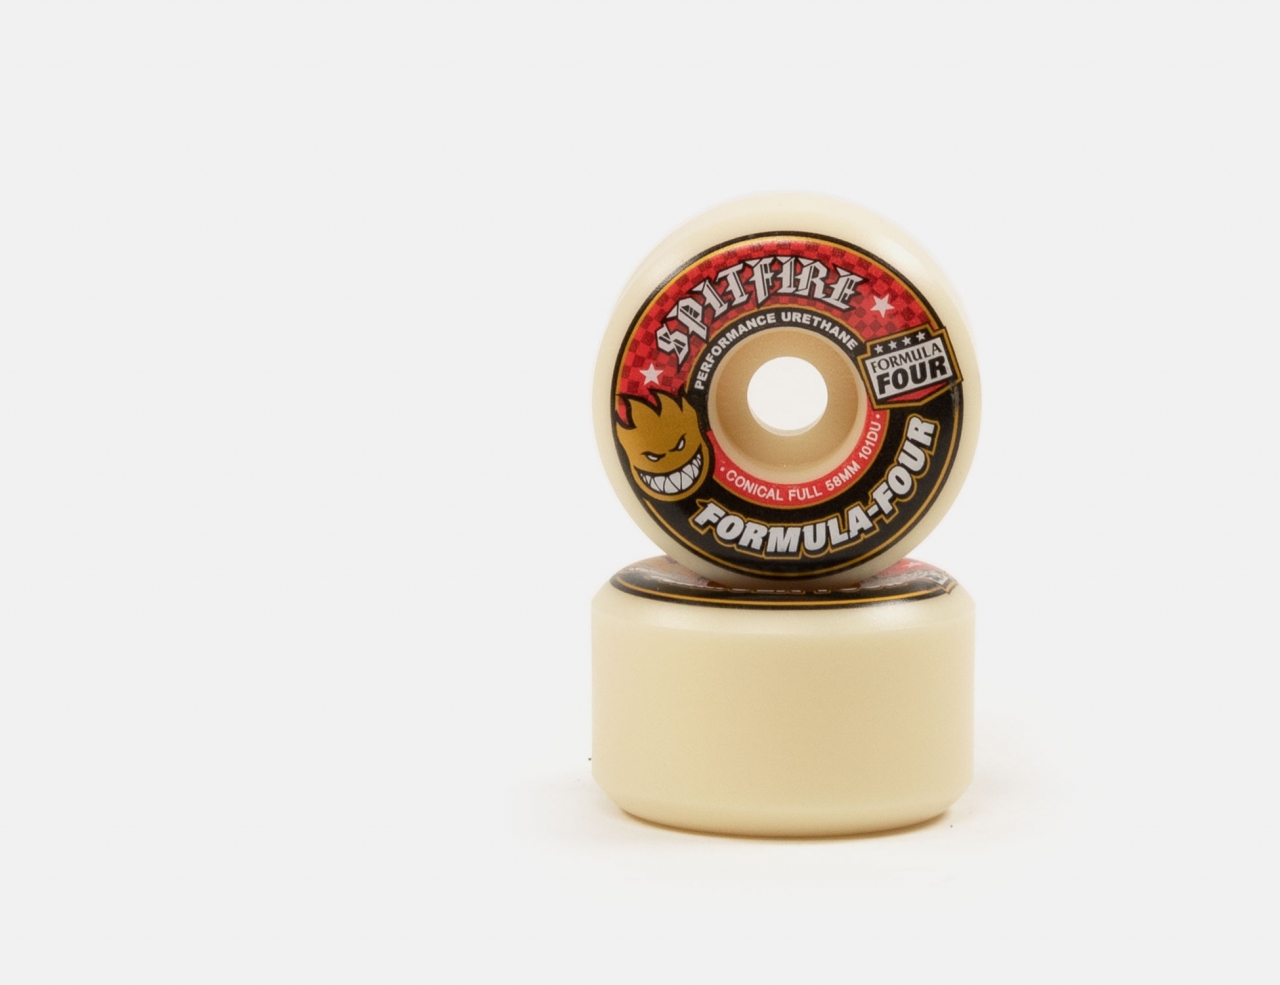 Spitfire F4 Conical Full 58mm 101a Wheels